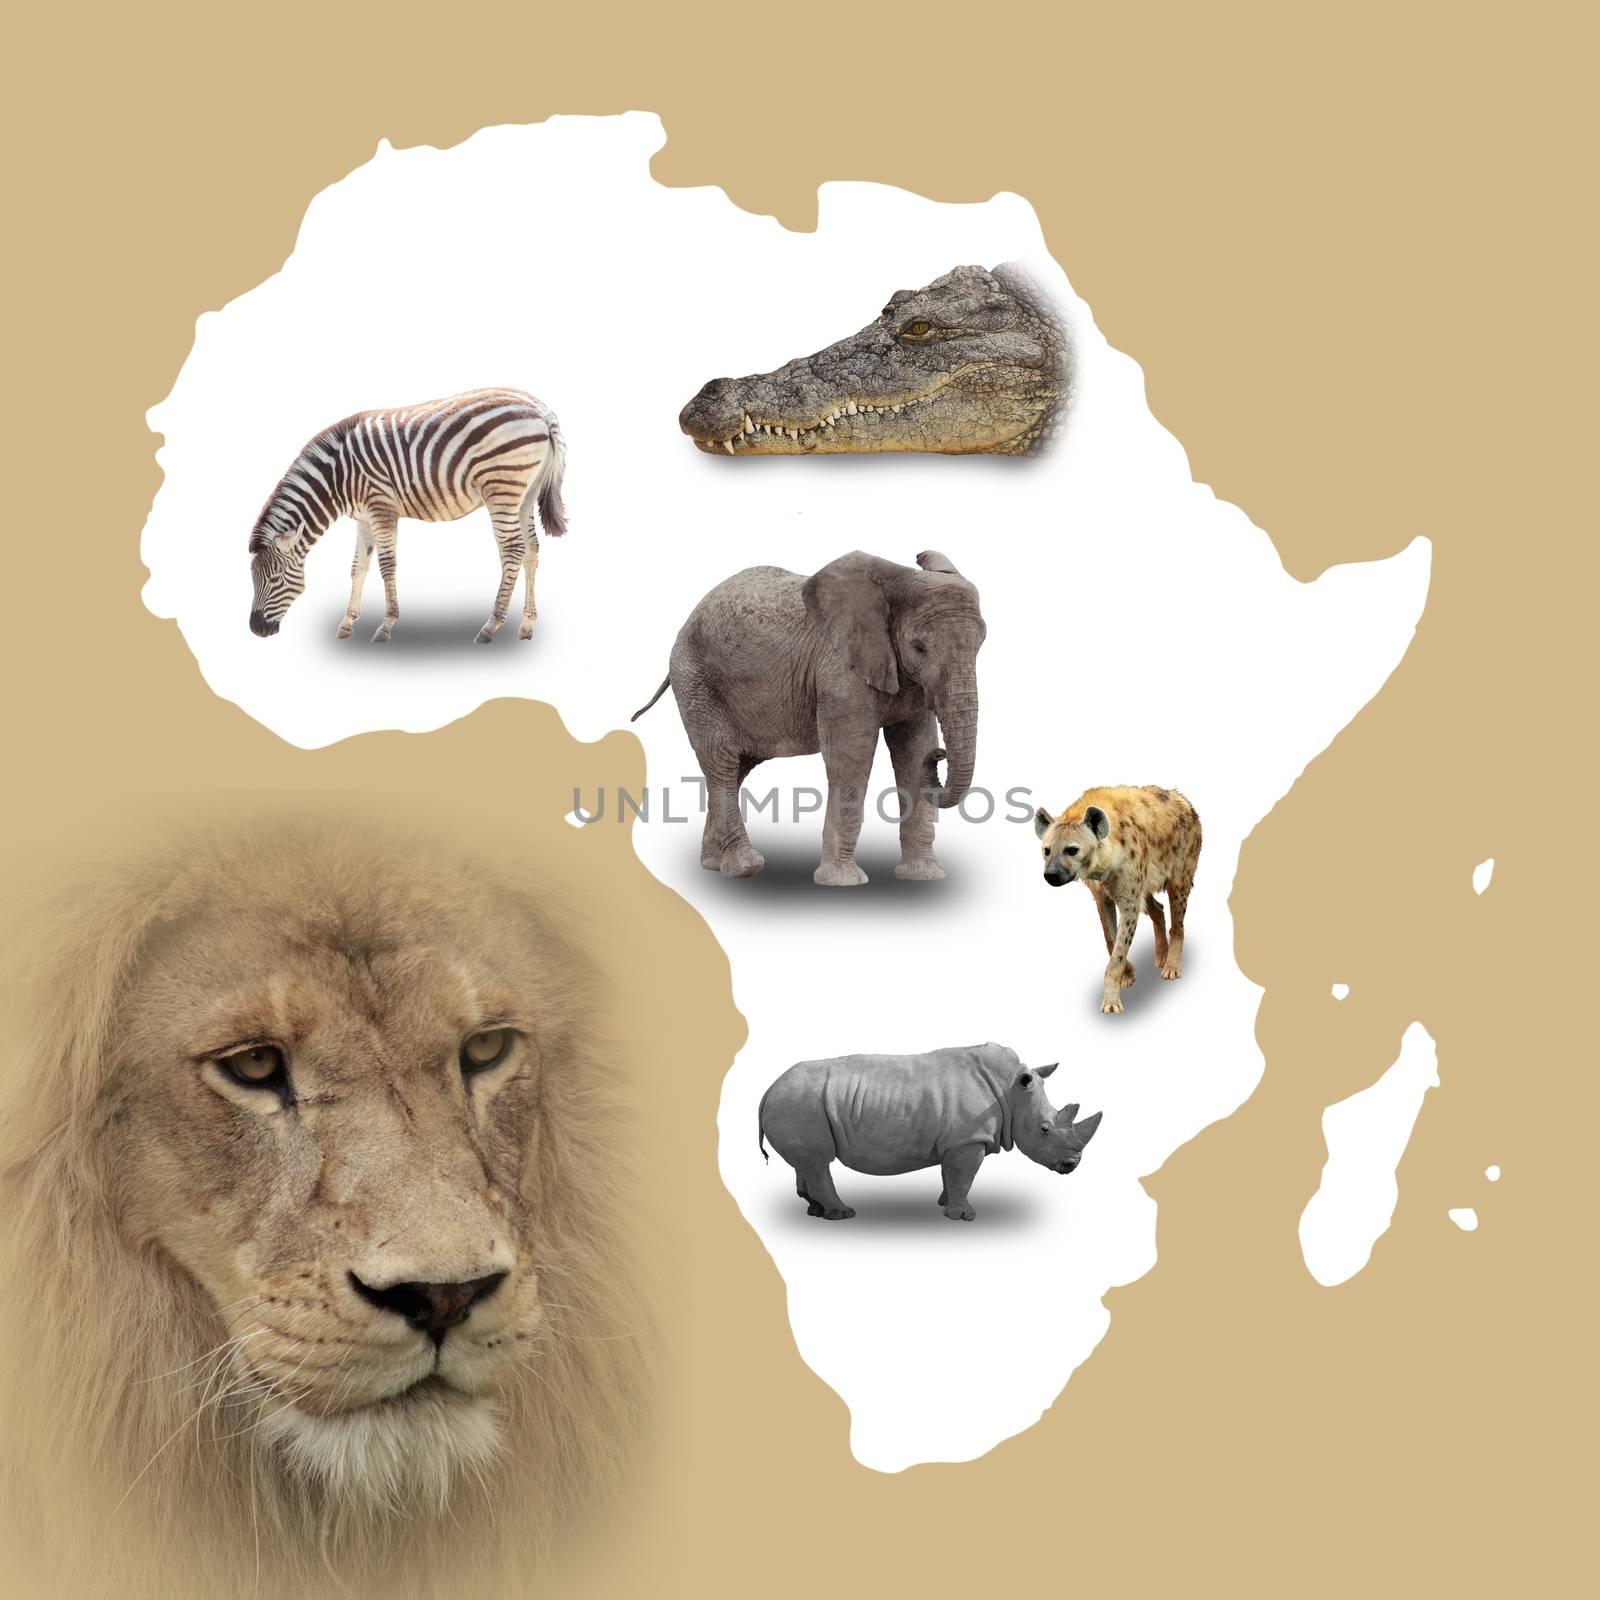 a map of africa with some isolated animals and a portrait of a lion